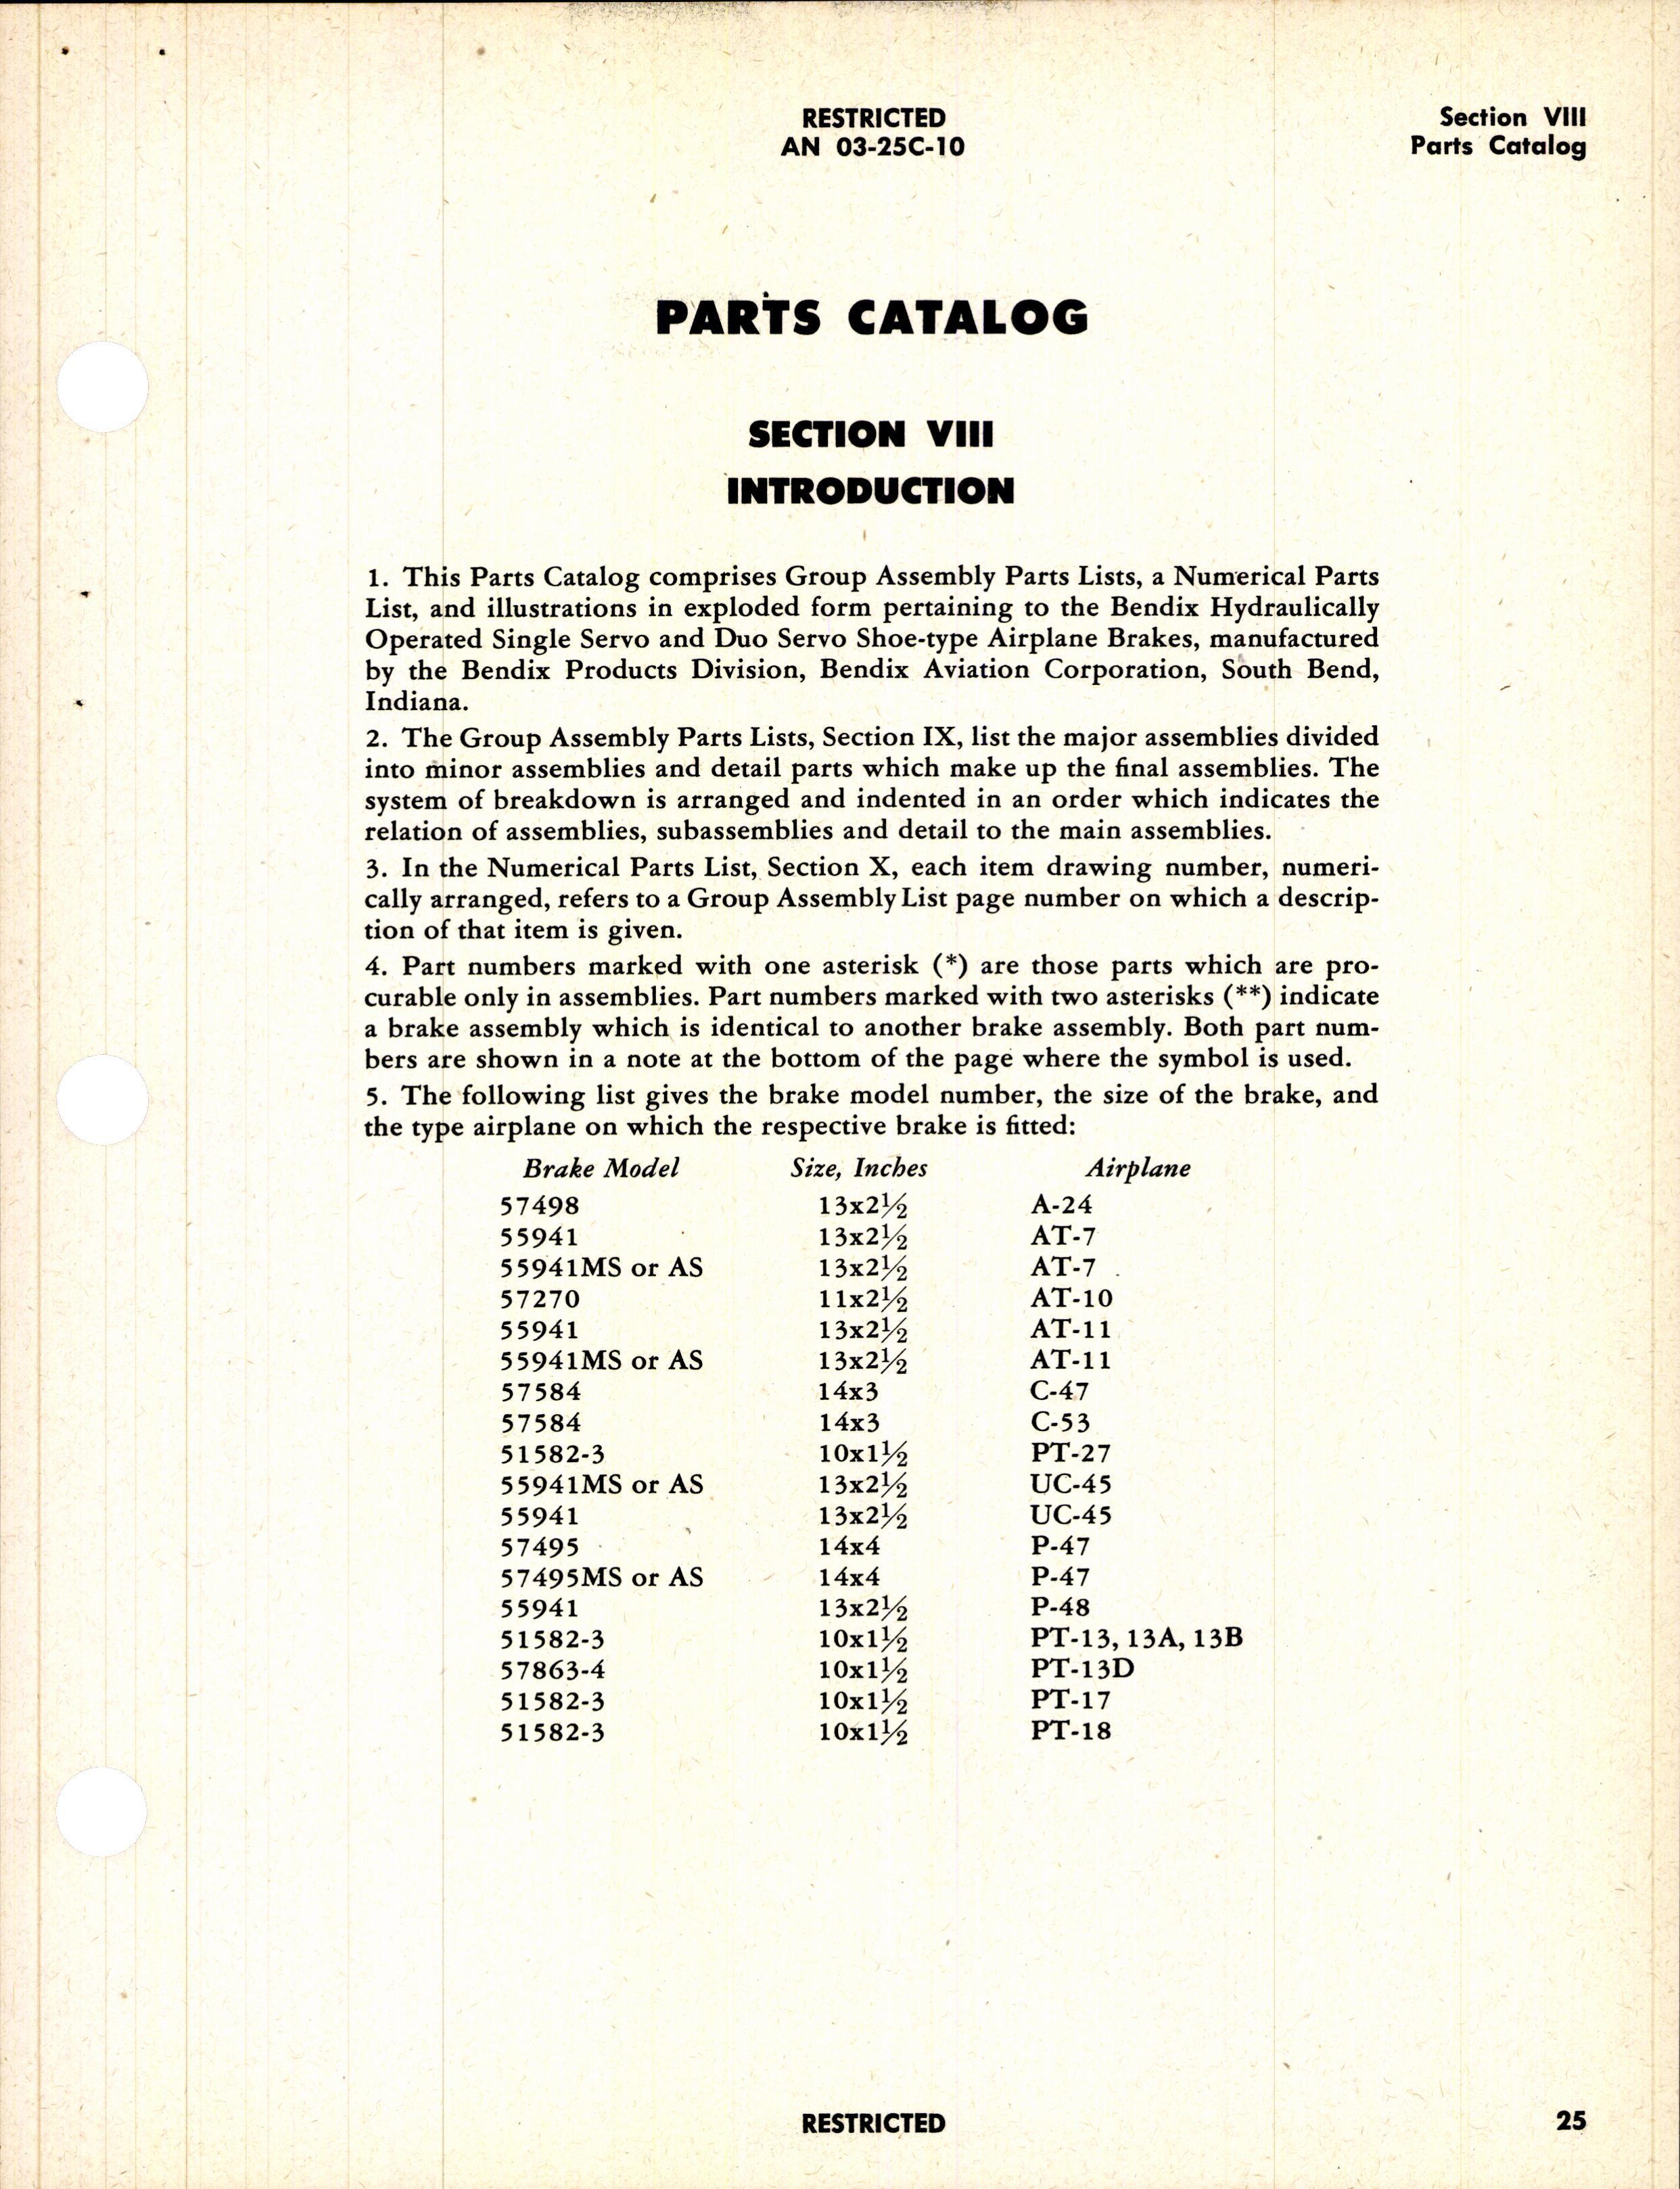 Sample page  49 from AirCorps Library document: Handbook of Instructions with Parts Catalog for Bendix Brakes (Later Types)